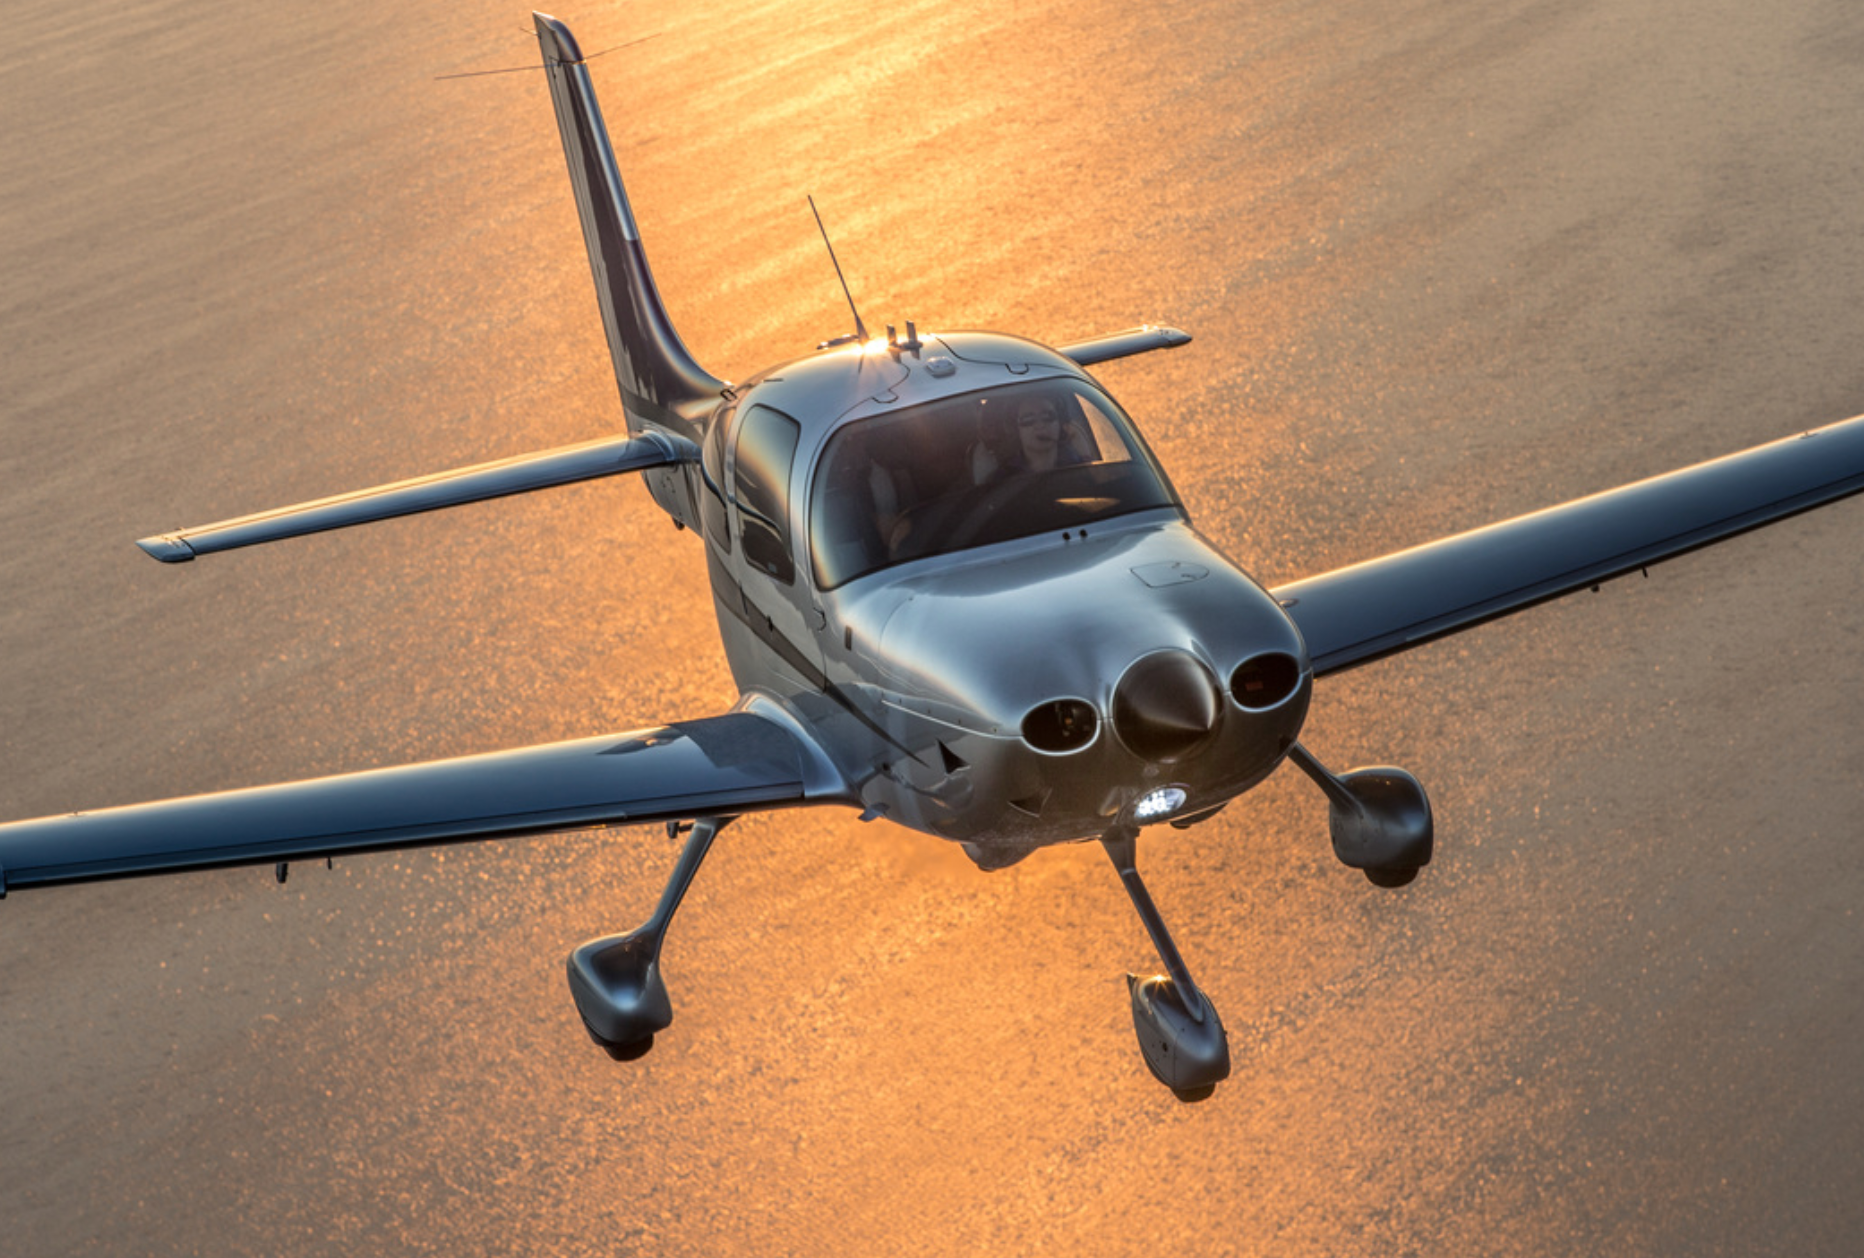 All in Aviation Offers Flight Lesson Experiences